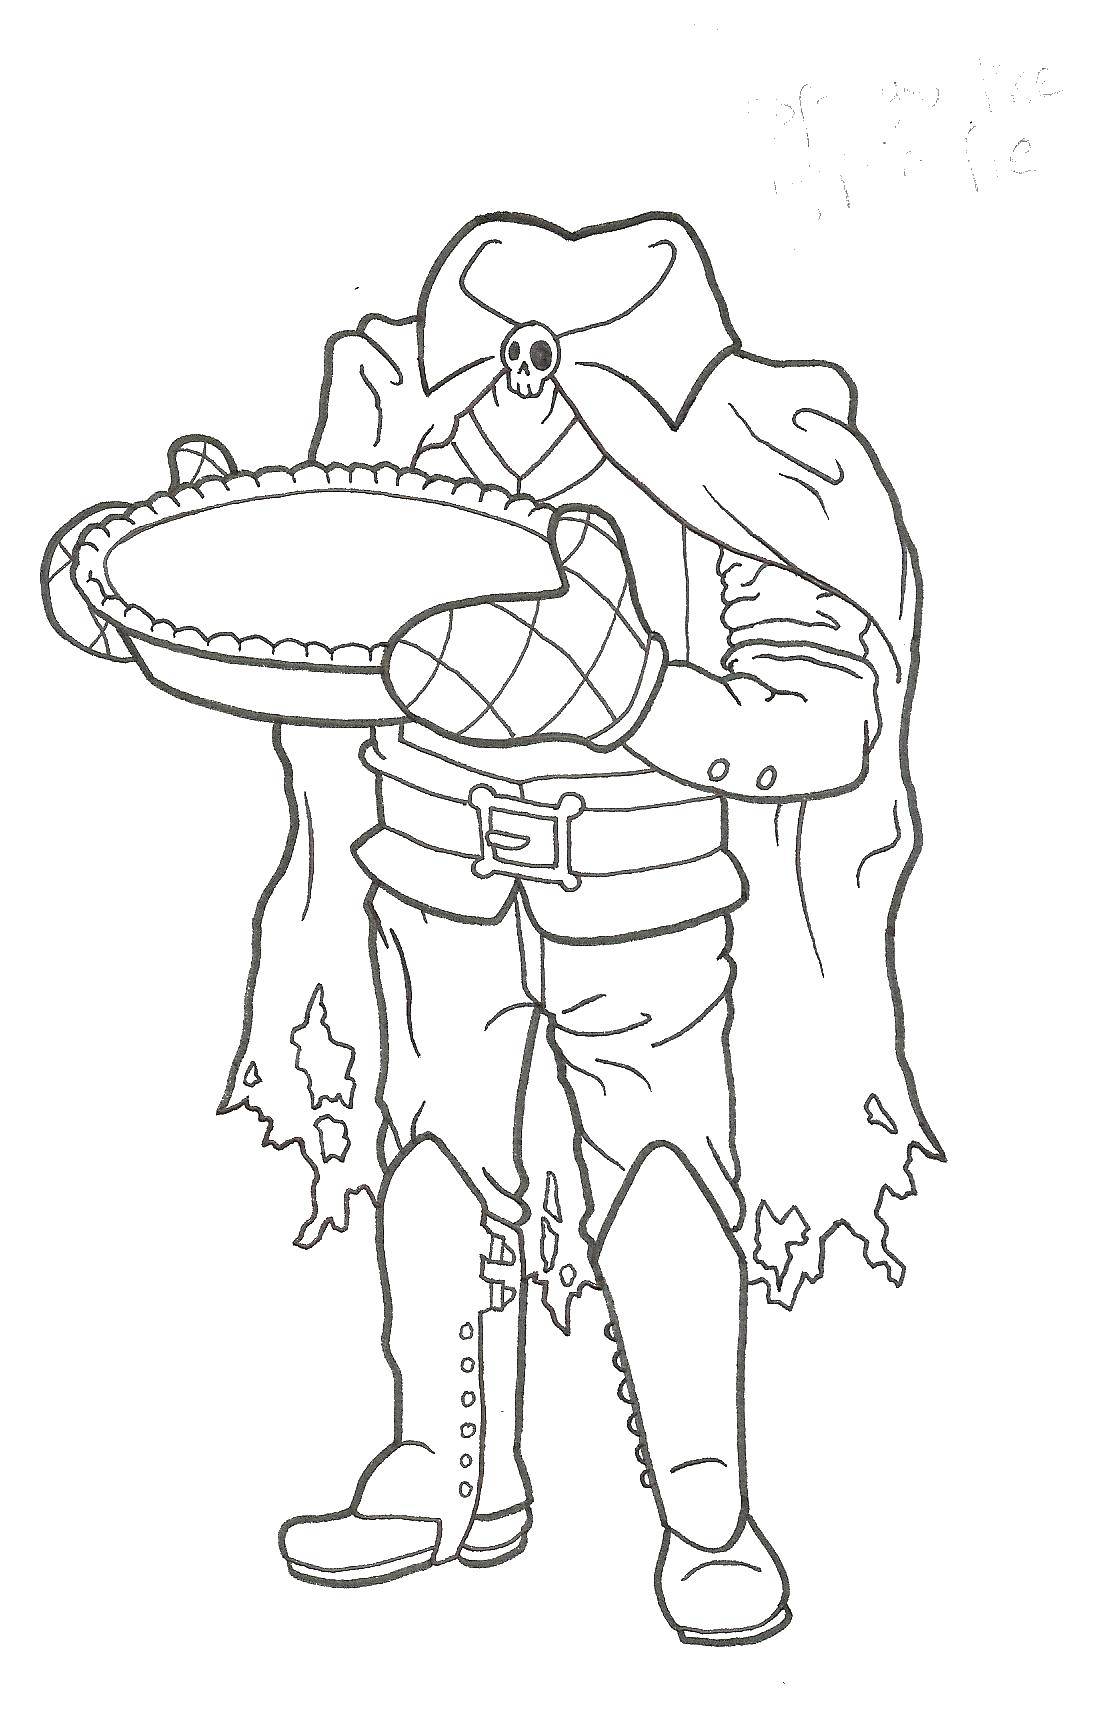 Coloring The horseman without a head chef. Category Fairy tales. Tags:  rider, cook.